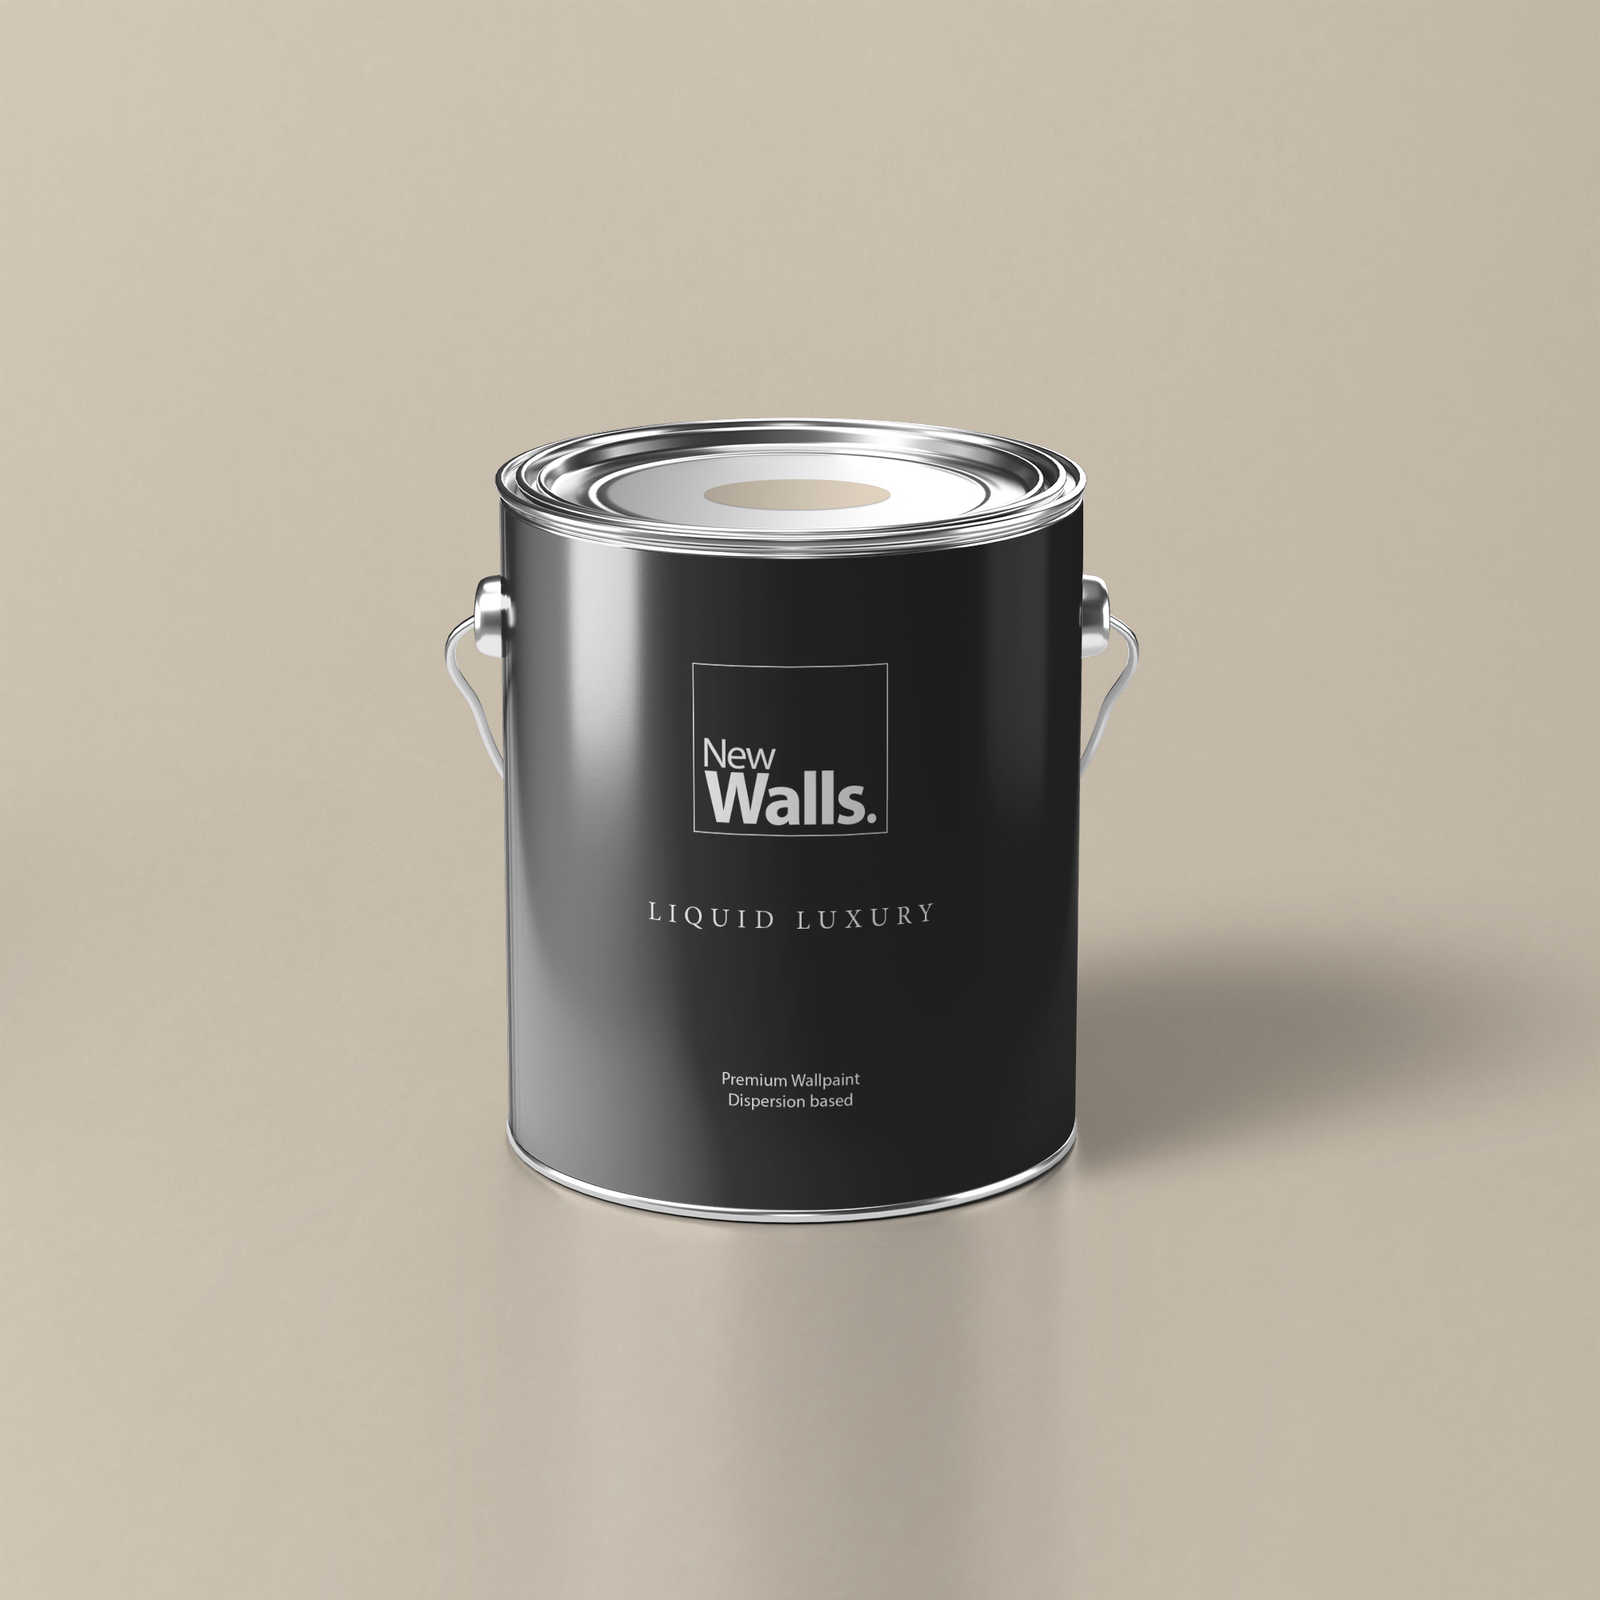 Premium Wall Paint Warm Sand »Essential Earth« NW708 – 5 litre
